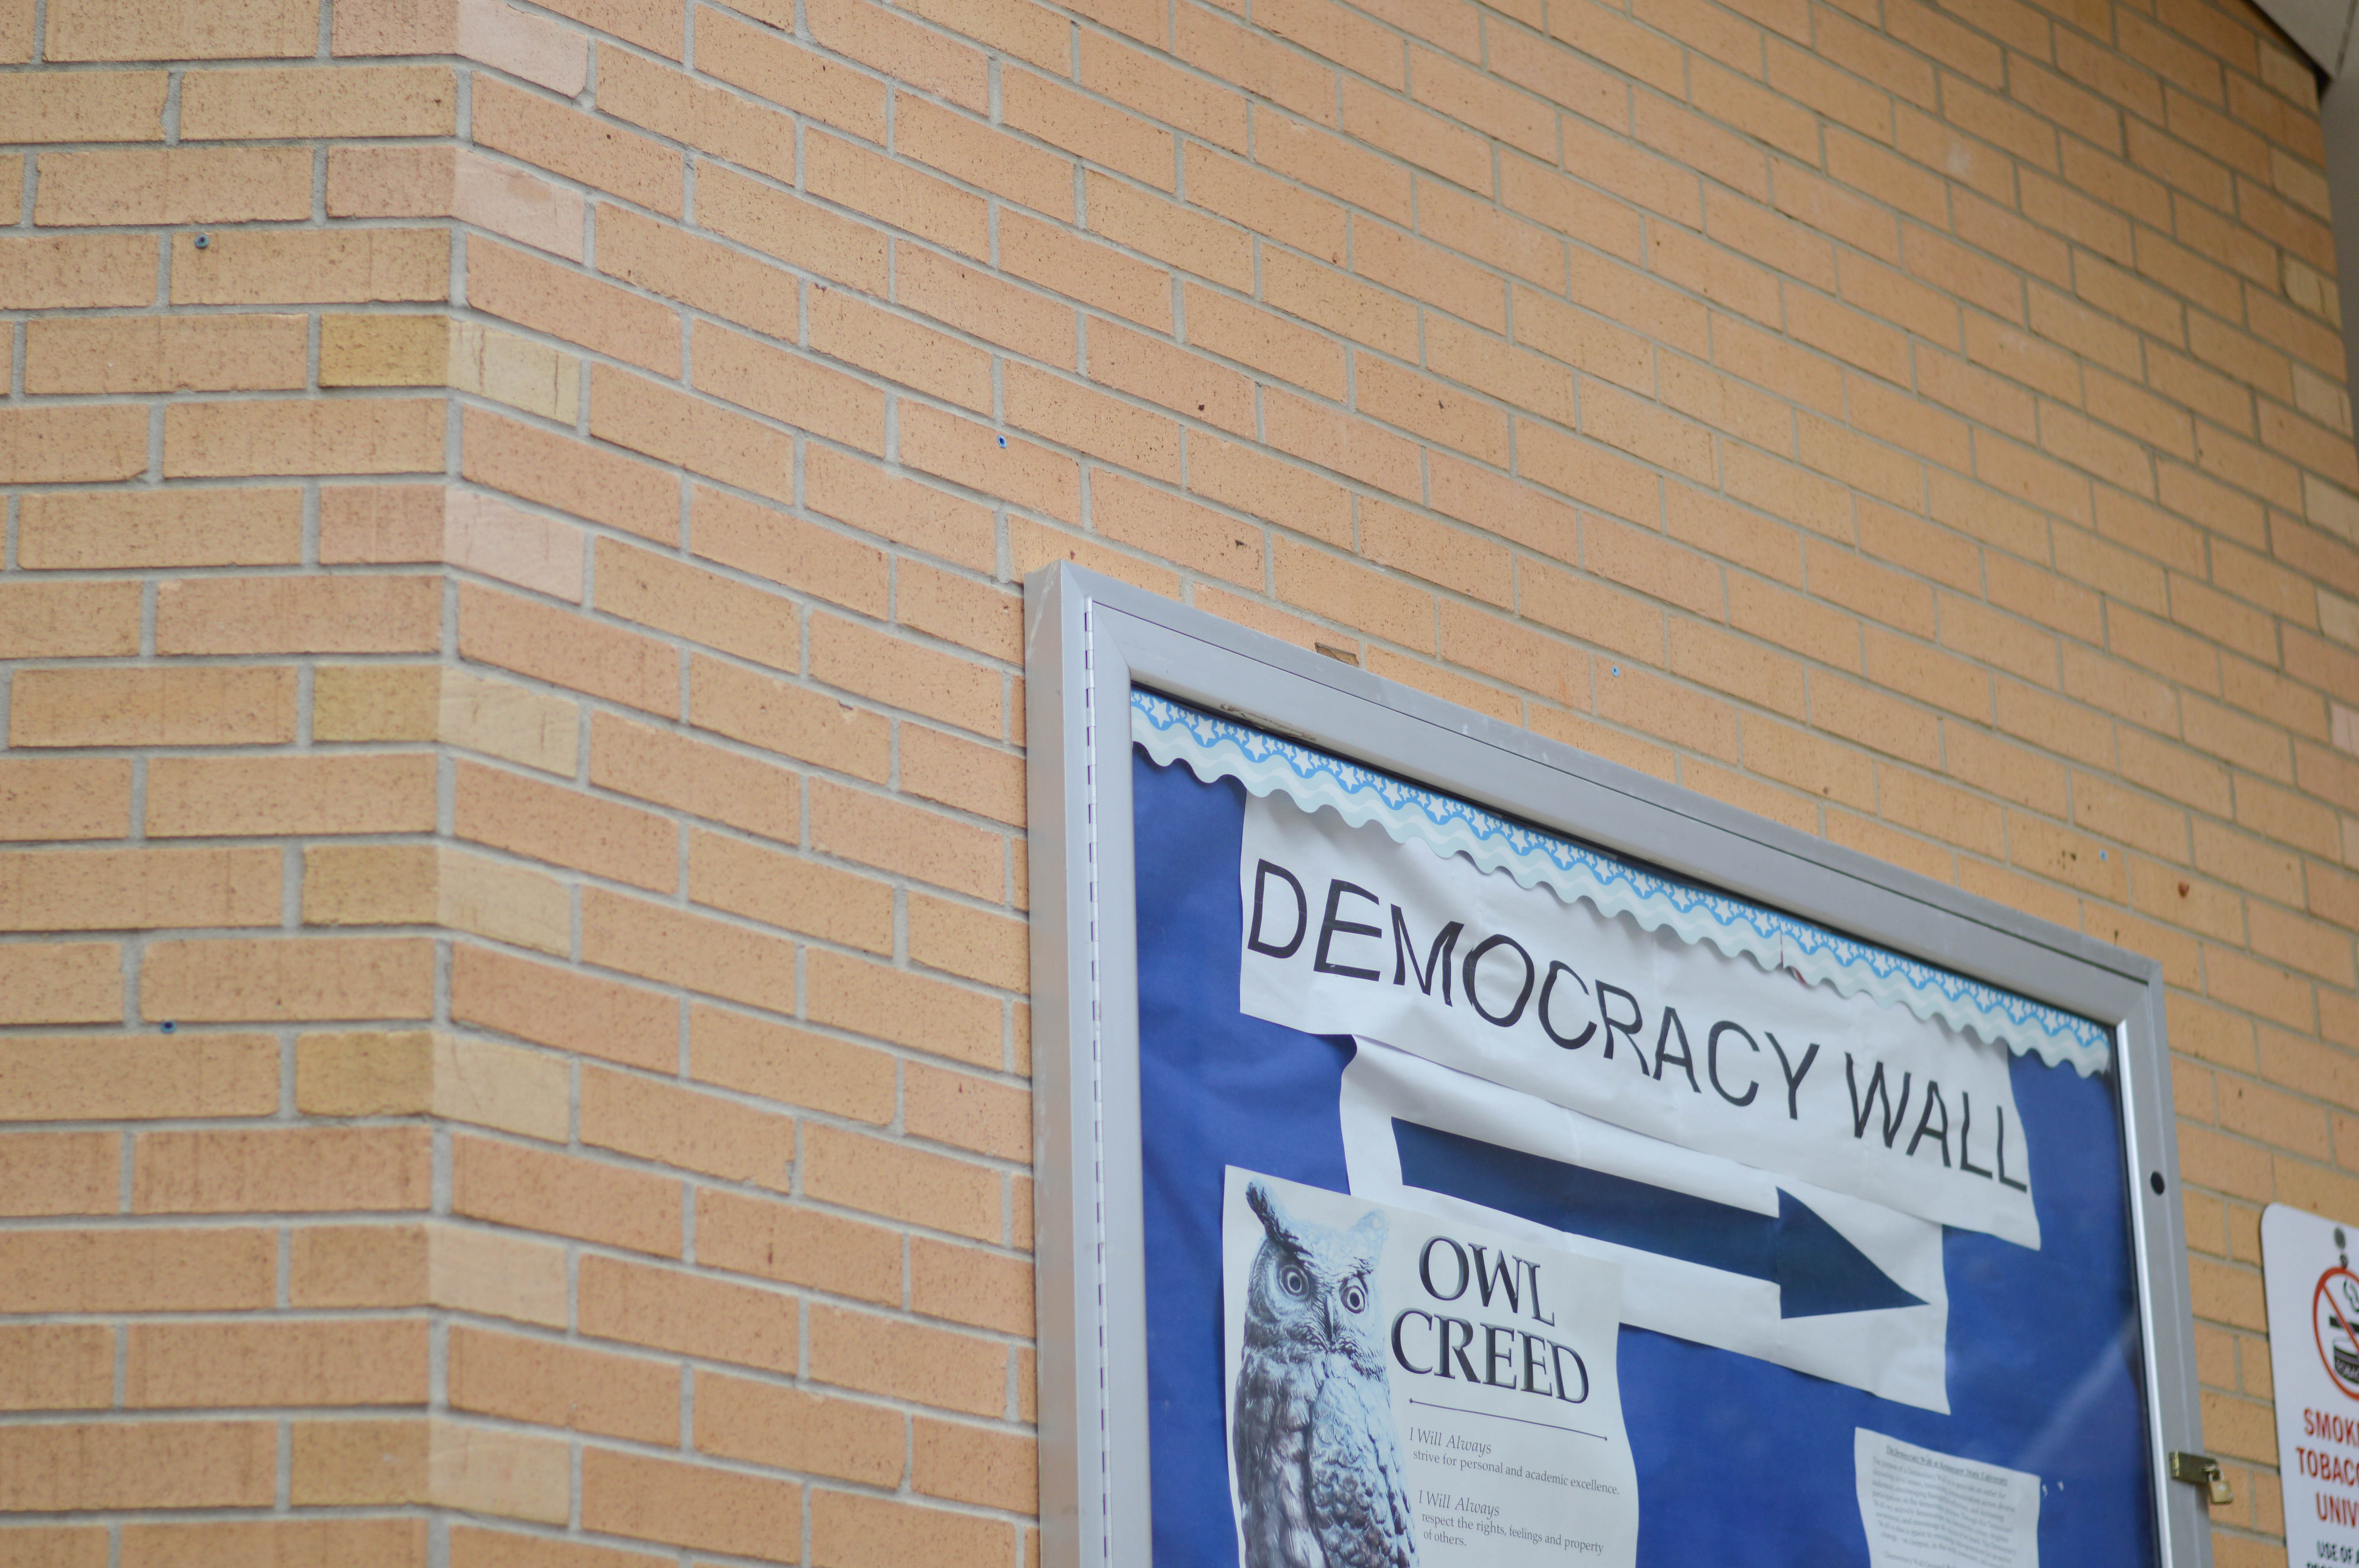 OPINION: Student Democracy Wall must go